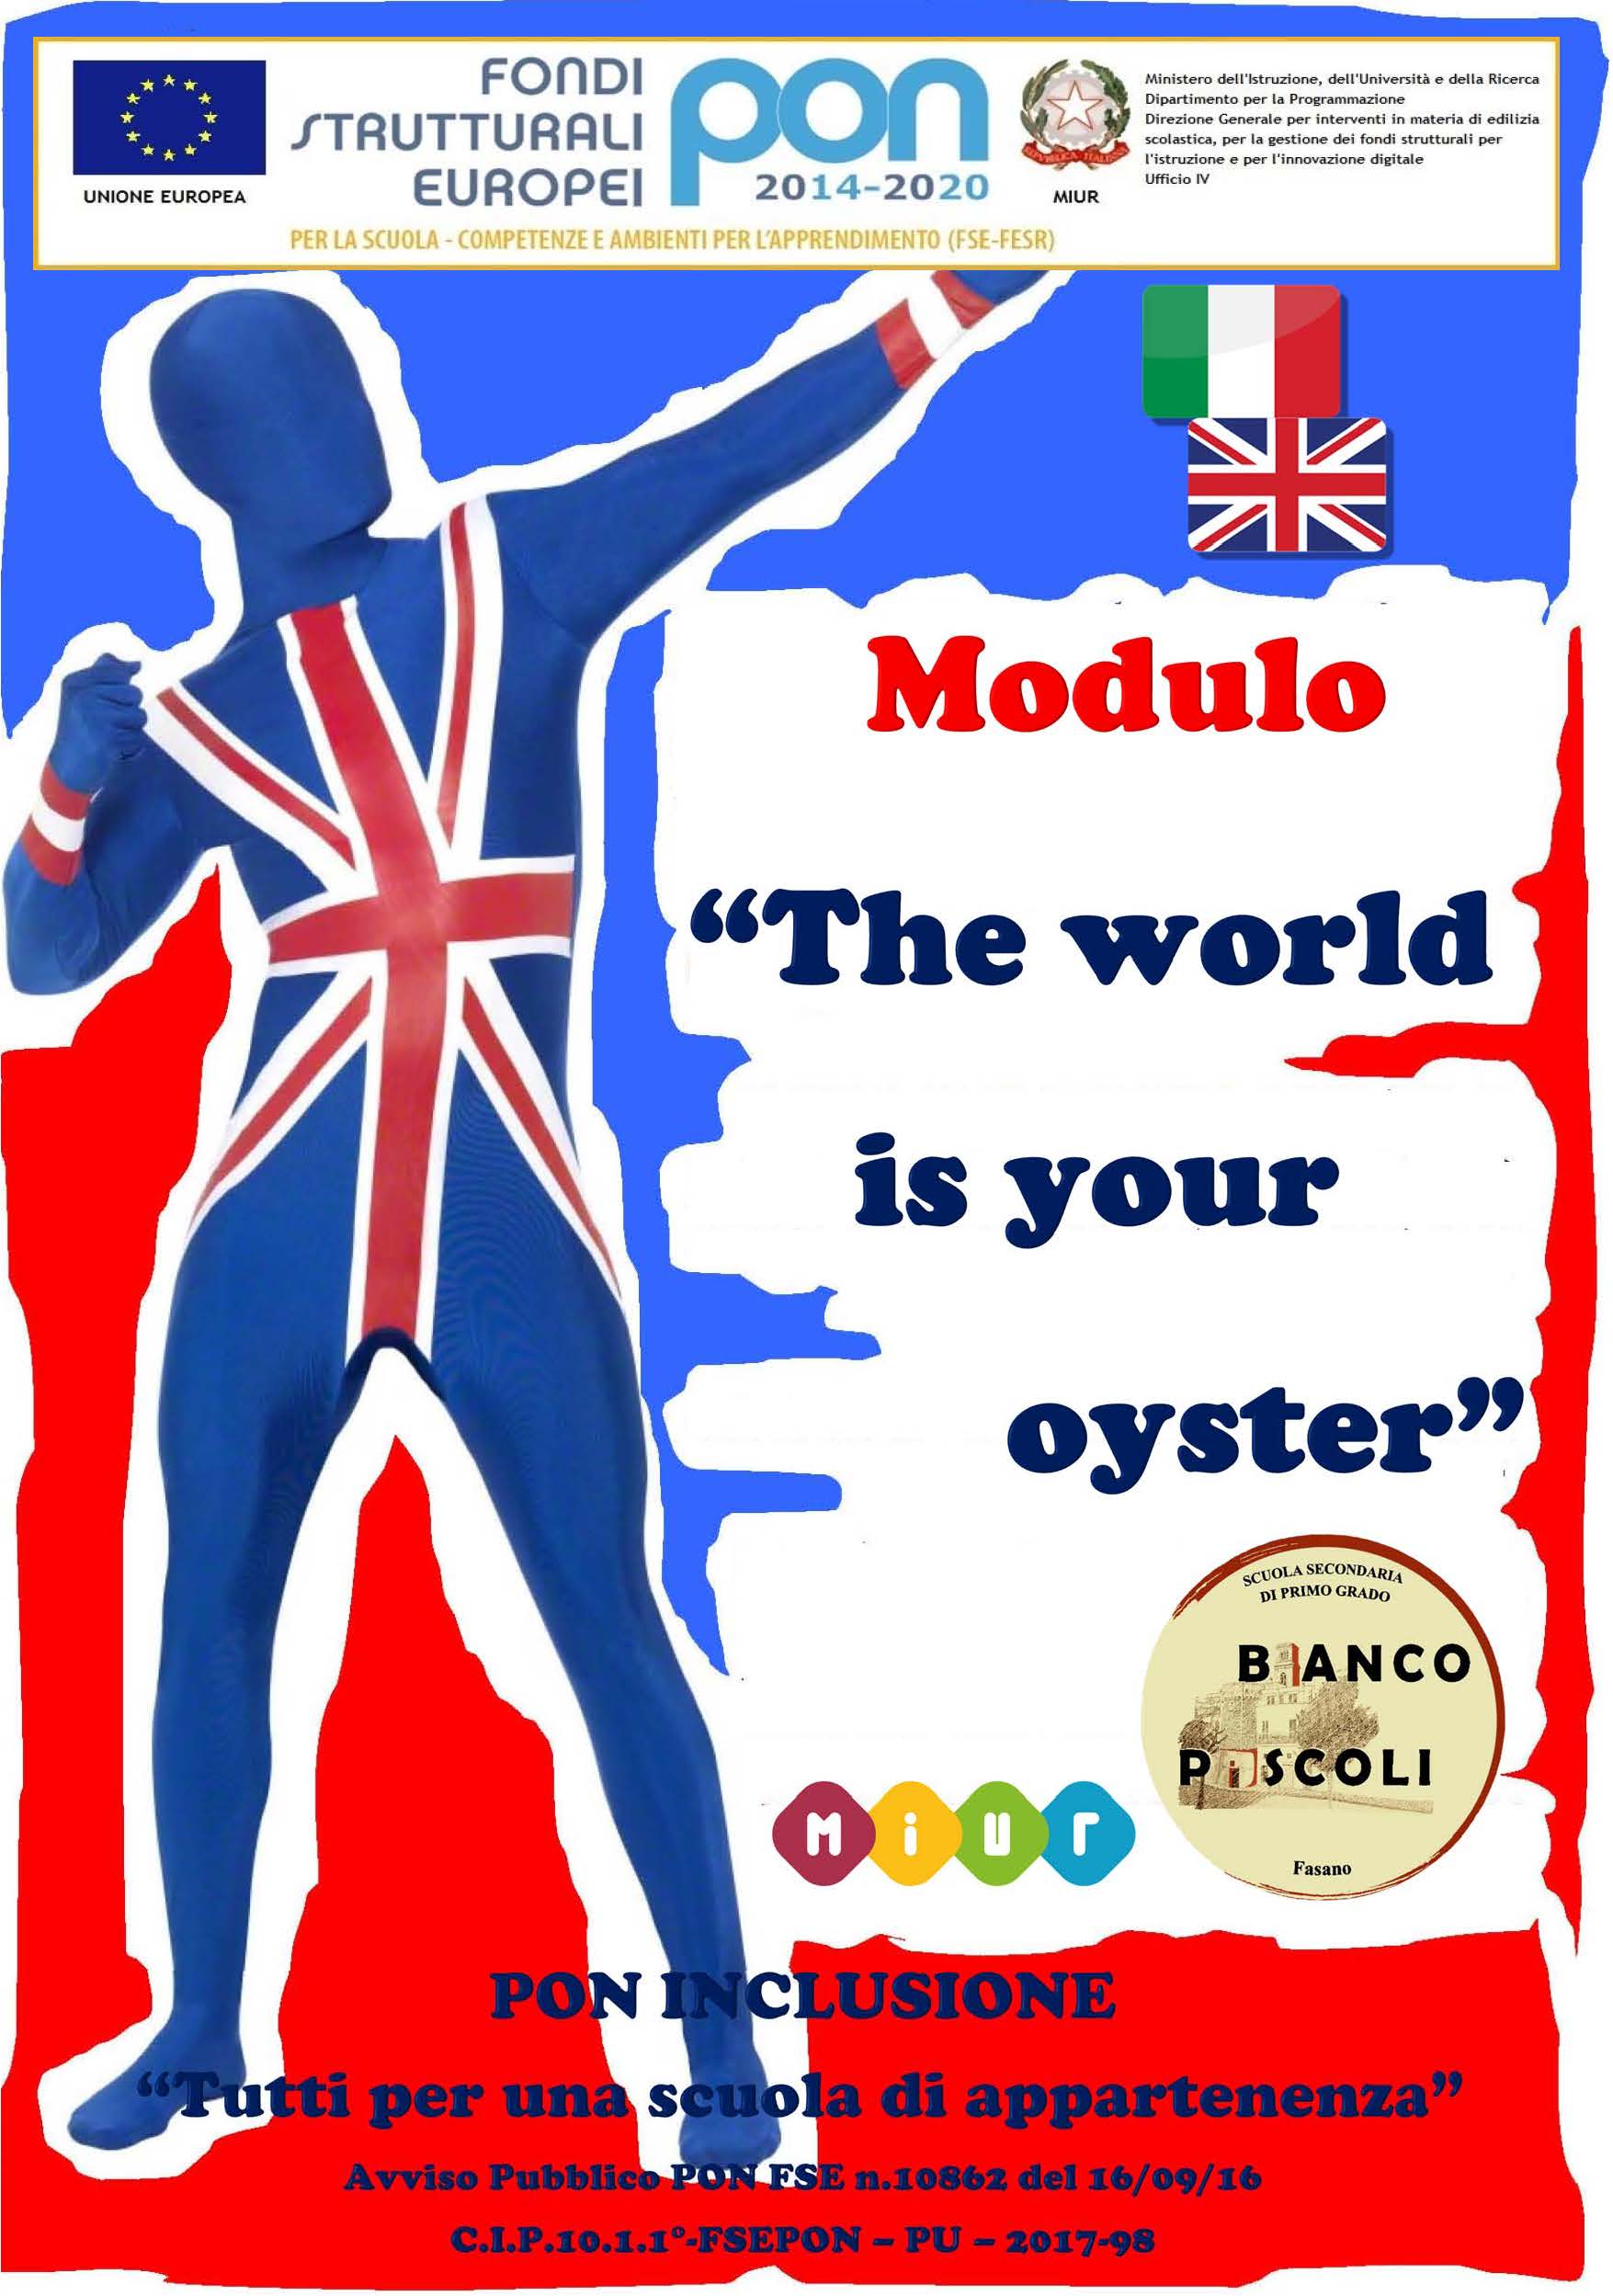 The world is your oyster